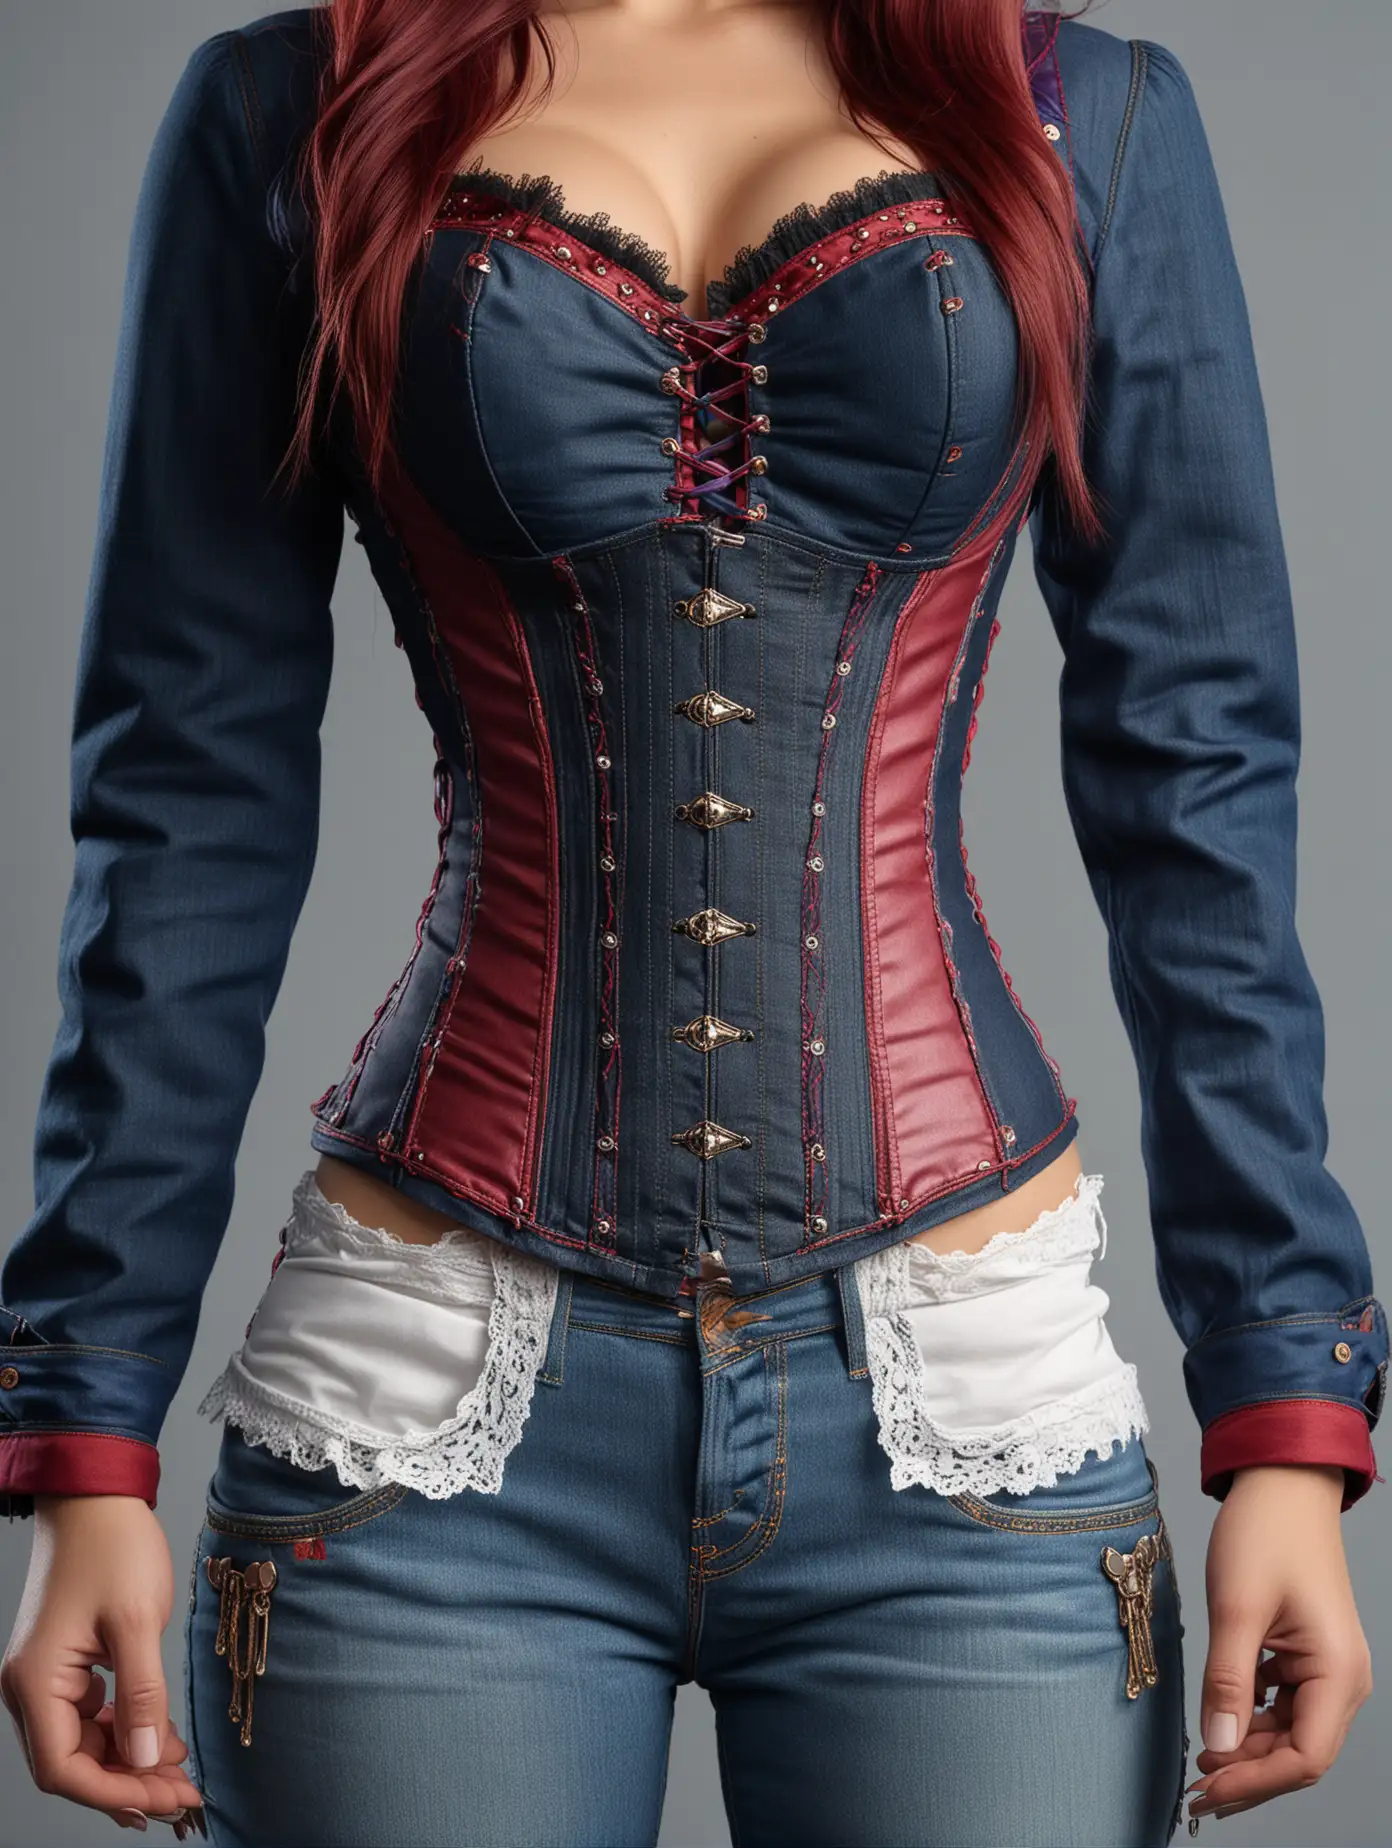 ((full body shot)), ((rear view perspective)), create a realistic 3d image of 20 year old woman with long multicolored hair, she is wearing fitted dark blue Levi's jeans and a ((multicolored corset)),  maroon blazer, her hands are on her waist,((perfect female body, narrow waist, wide hips)), 8k uhd, dslr, soft lighting, high quality, film grain, Fujifilm XT3, Ultra-detail, Real, Photorealistic, High-definition face drawing, RAW photo